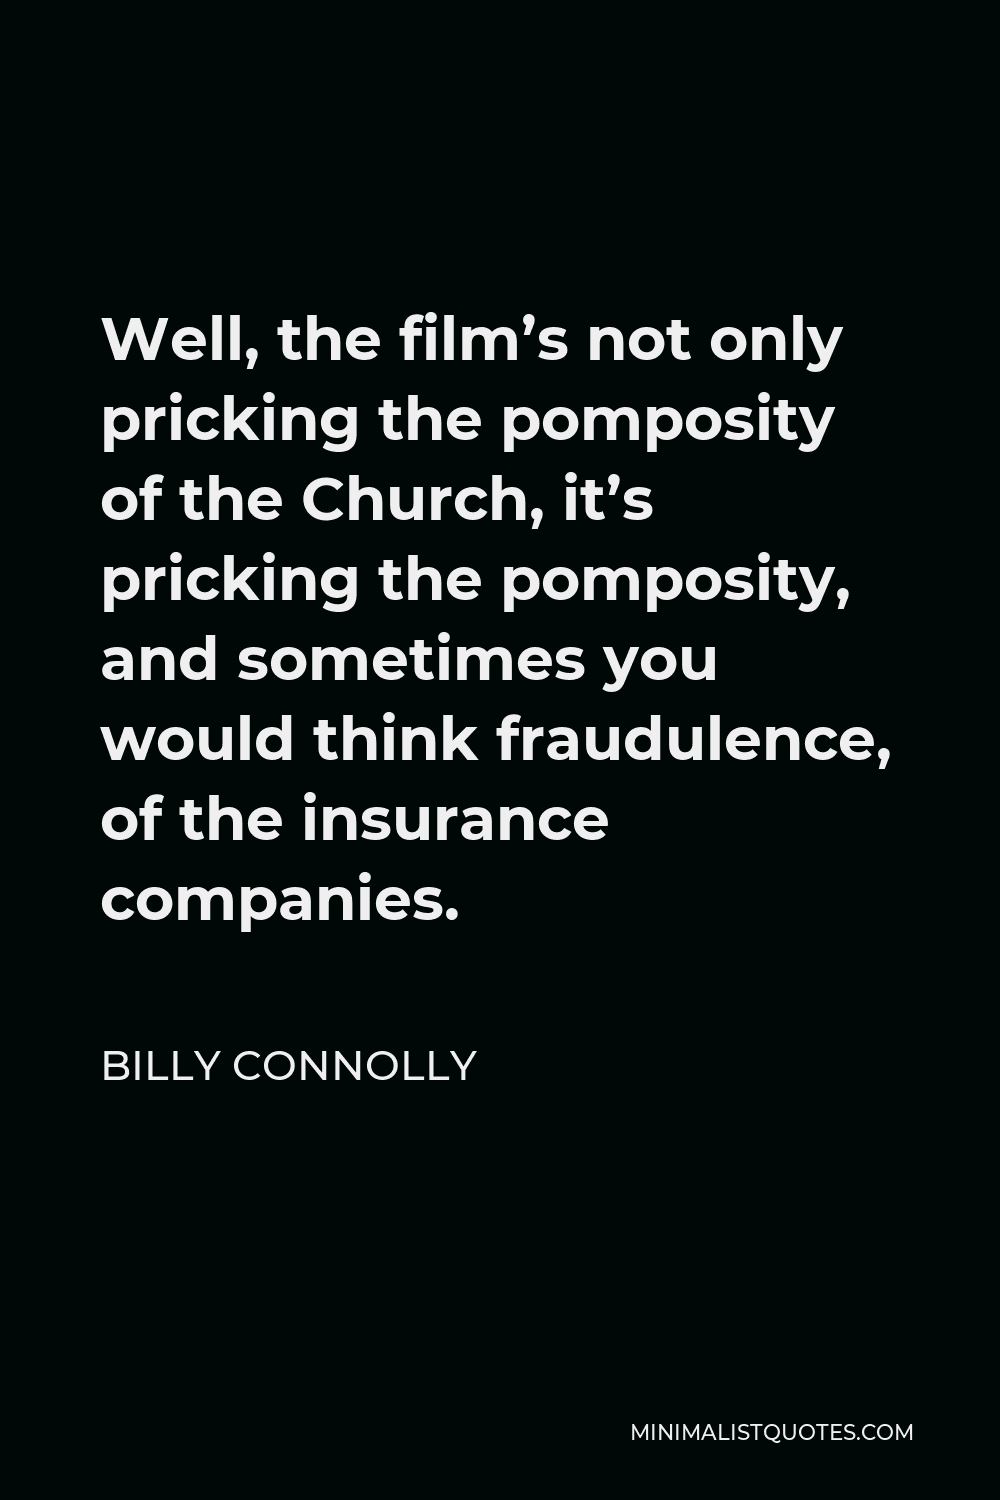 Billy Connolly Quote - Well, the film’s not only pricking the pomposity of the Church, it’s pricking the pomposity, and sometimes you would think fraudulence, of the insurance companies.